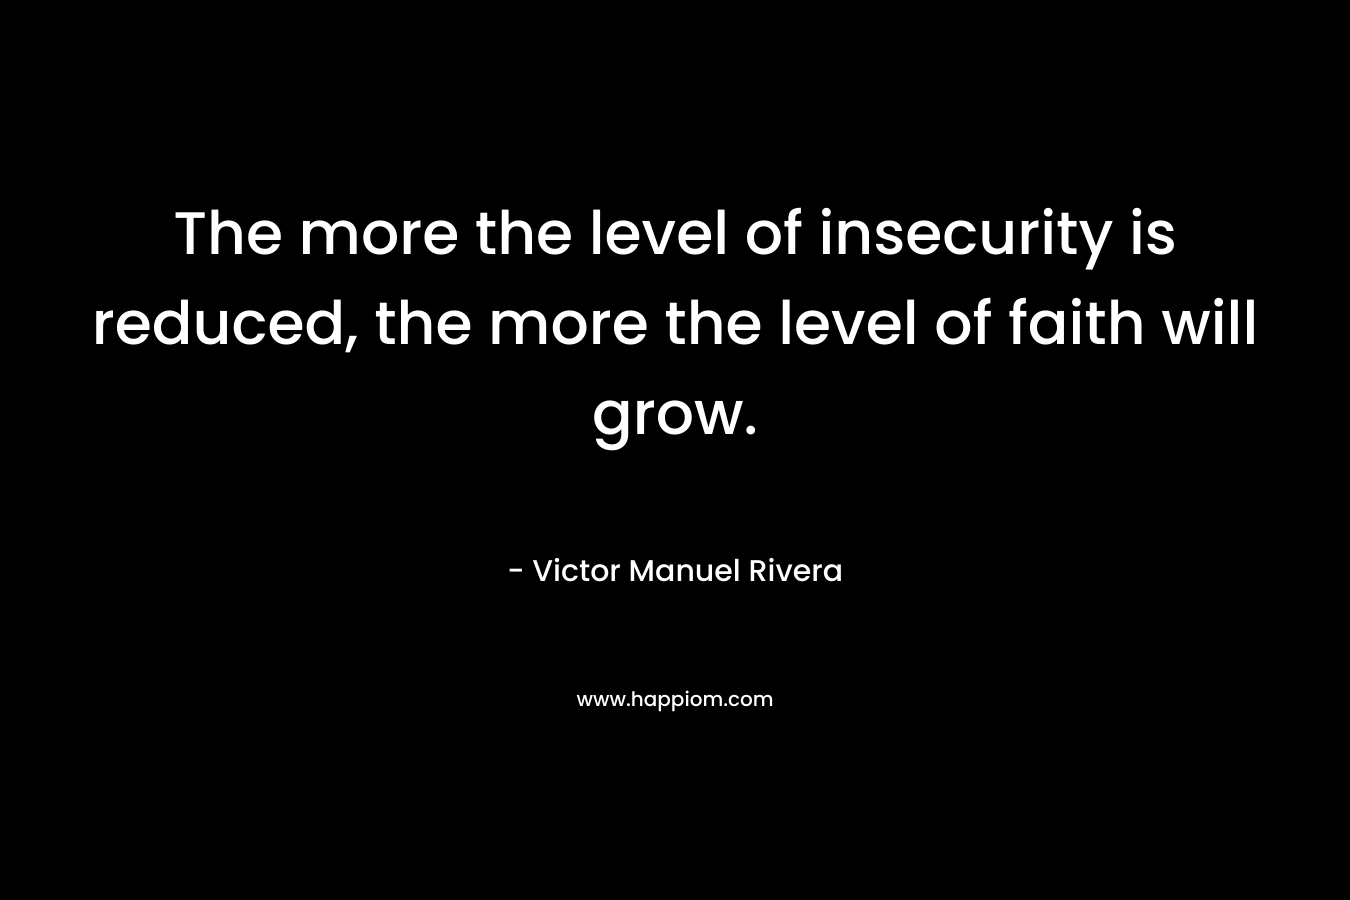 The more the level of insecurity is reduced, the more the level of faith will grow.